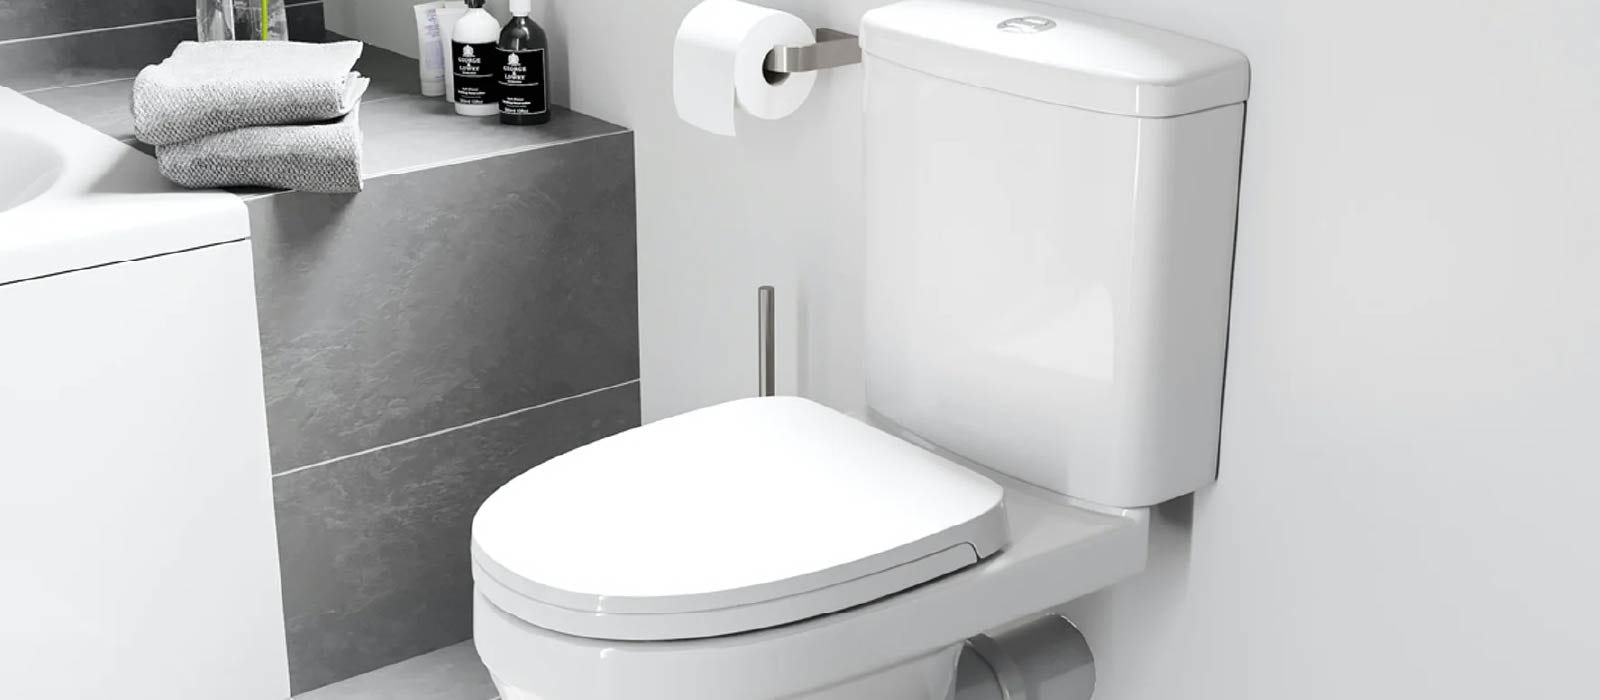 How to check your toilet for leaks, Get lavvy savvy